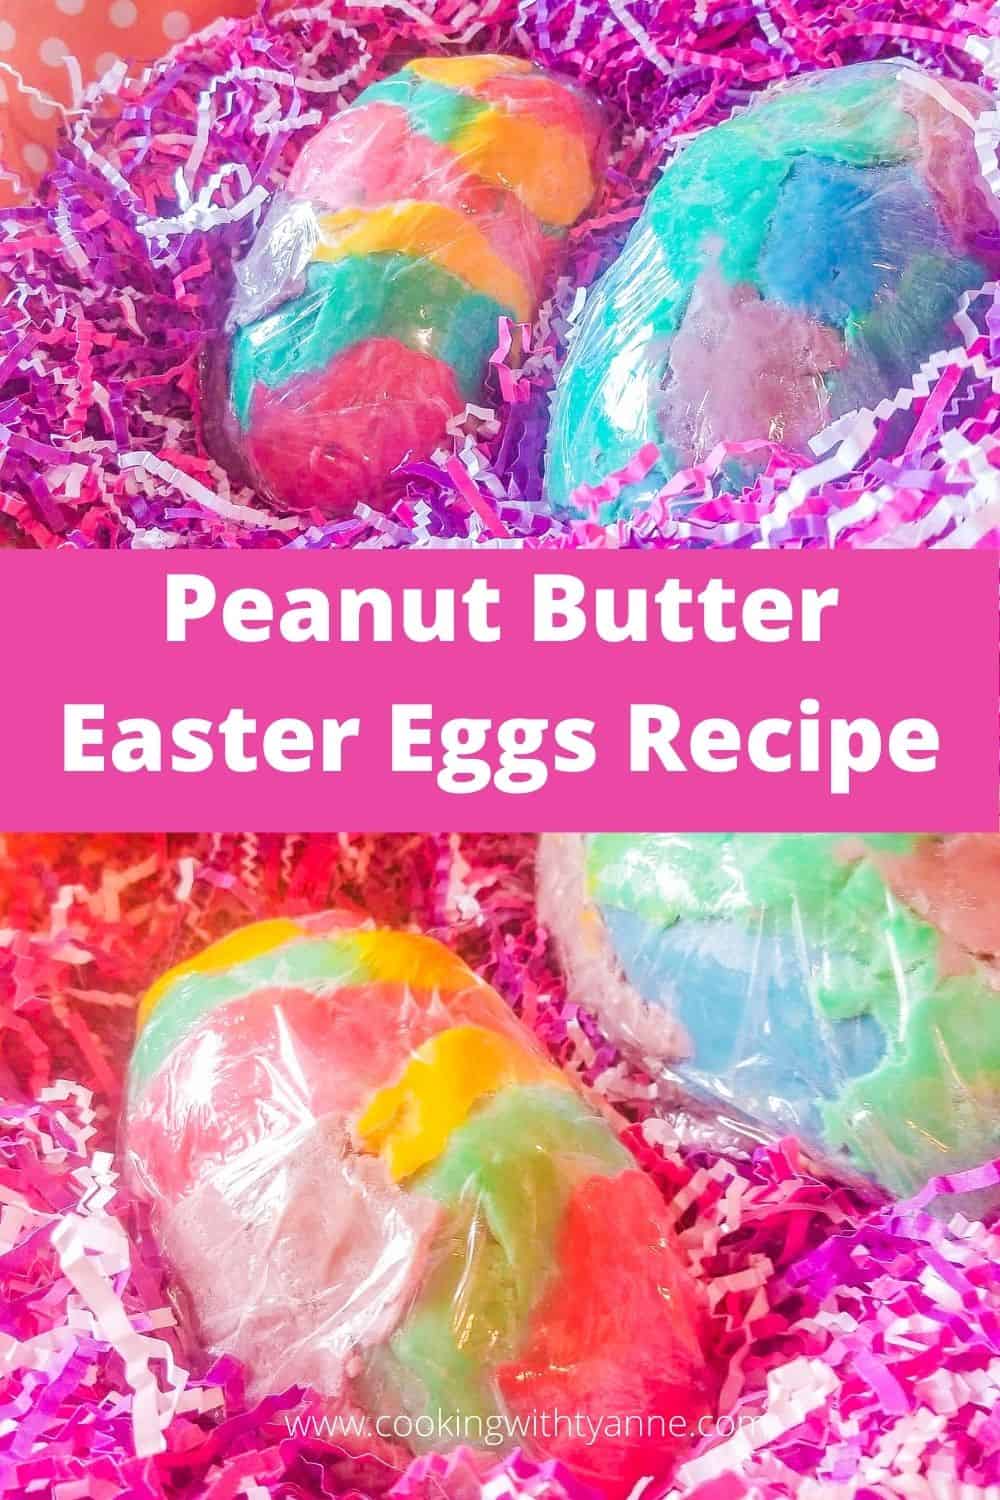 Peanut Butter Easter Eggs Recipe - Cooking with Tyanne